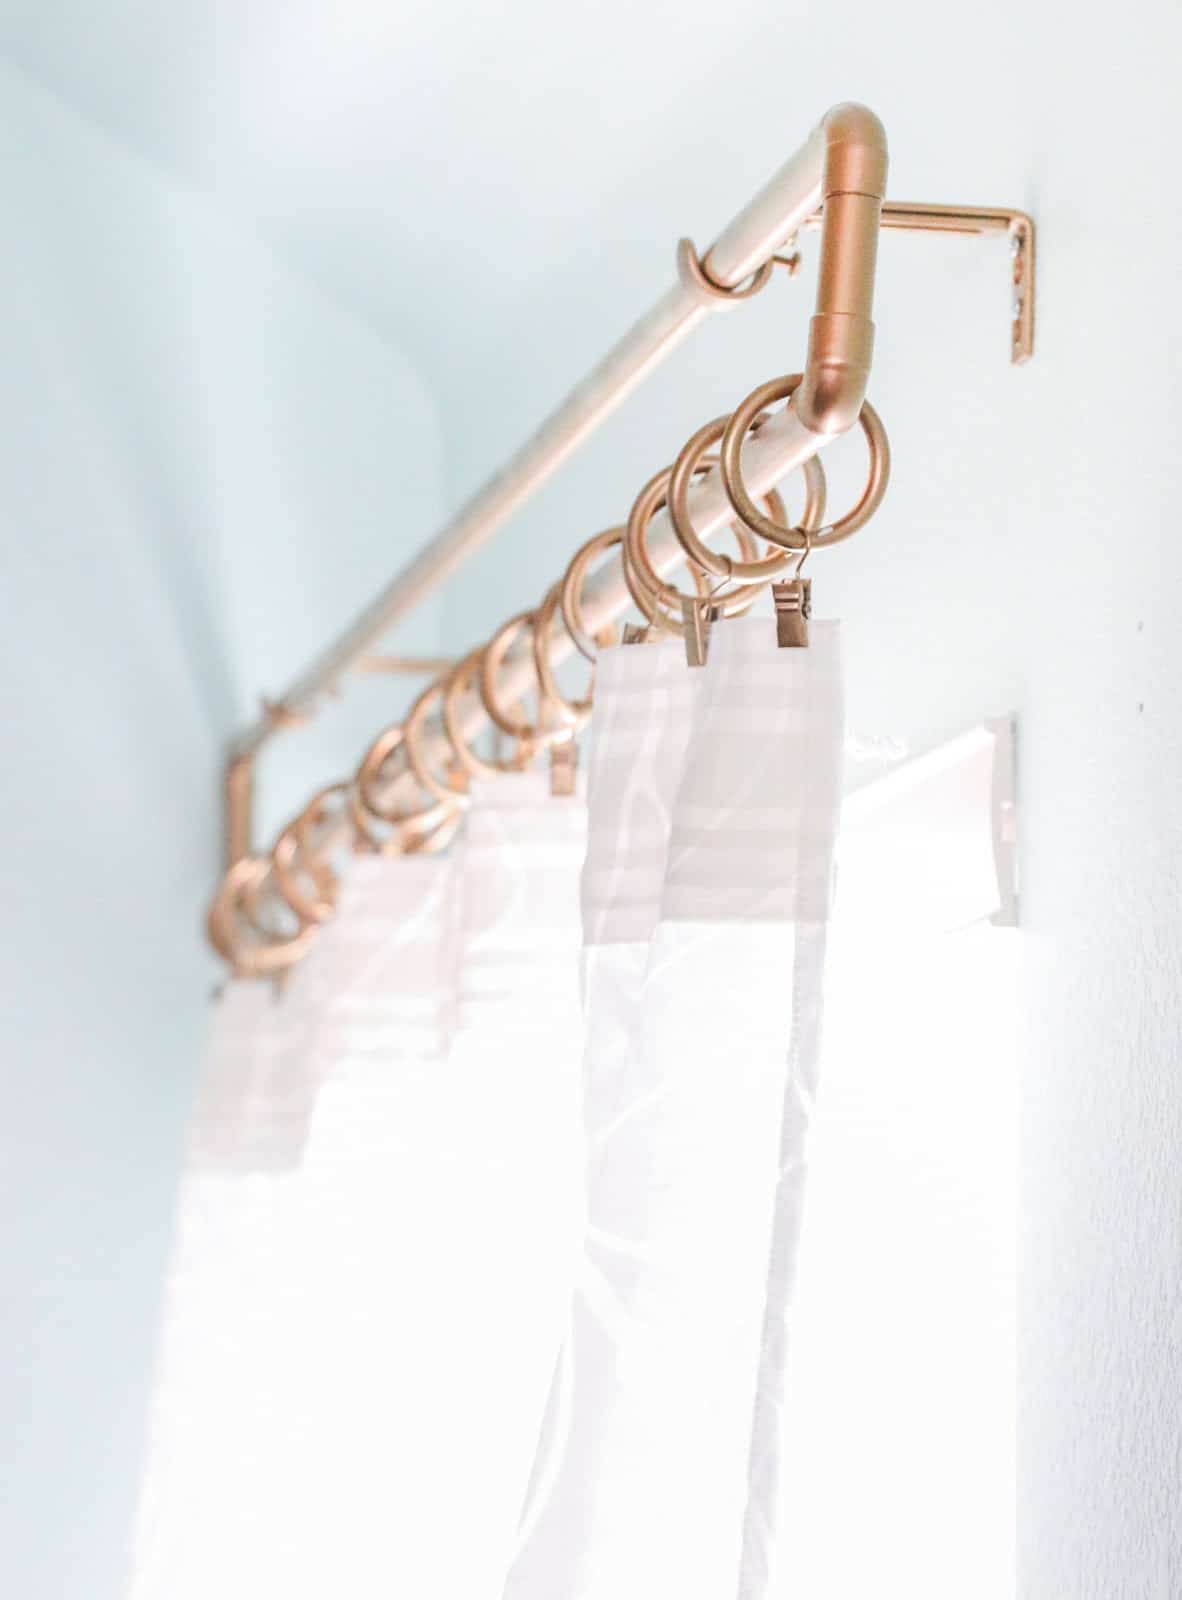 To Hang Curtains Without A Rod, Painting Shower Curtain Rod